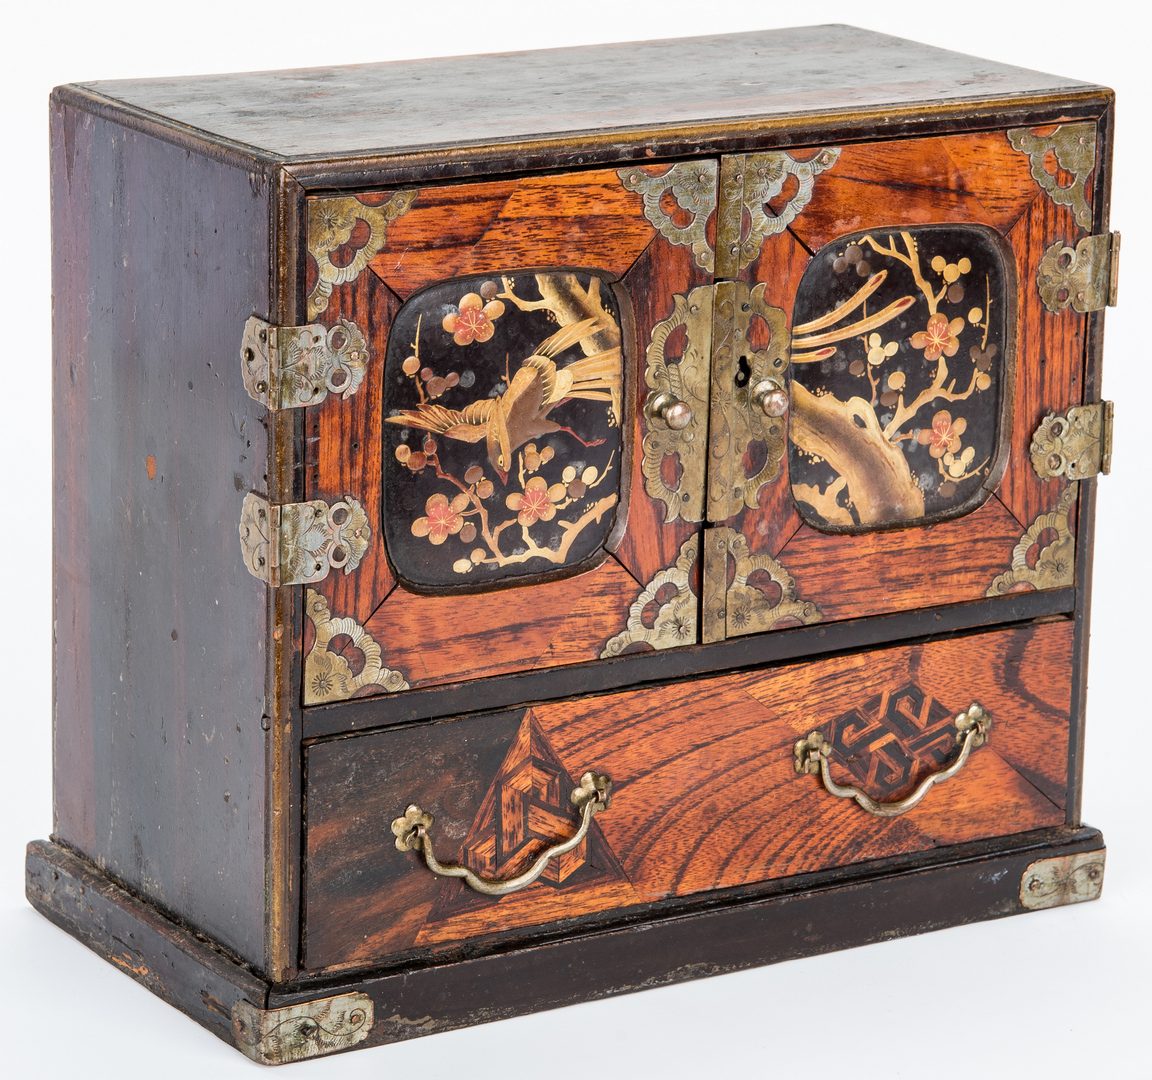 Lot 33: 2 Asian Inlaid Jewelry or Keepsake Chests